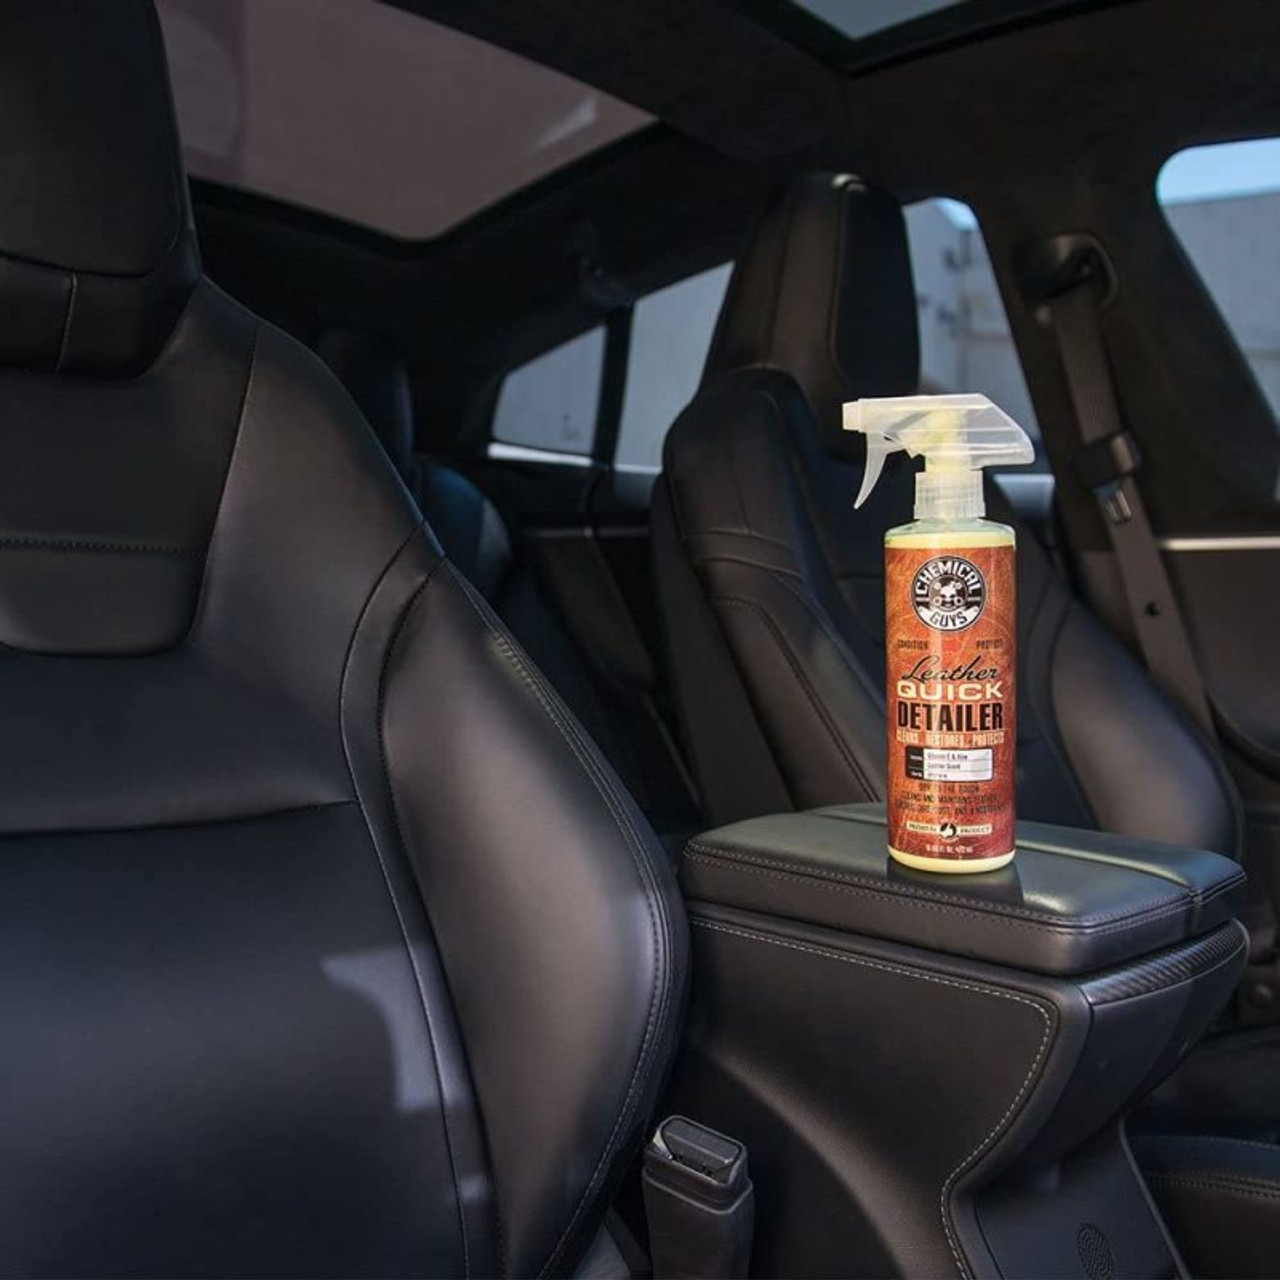 Chemical Guys InnerClean Interior Quick Detailer & Protectant - 16oz